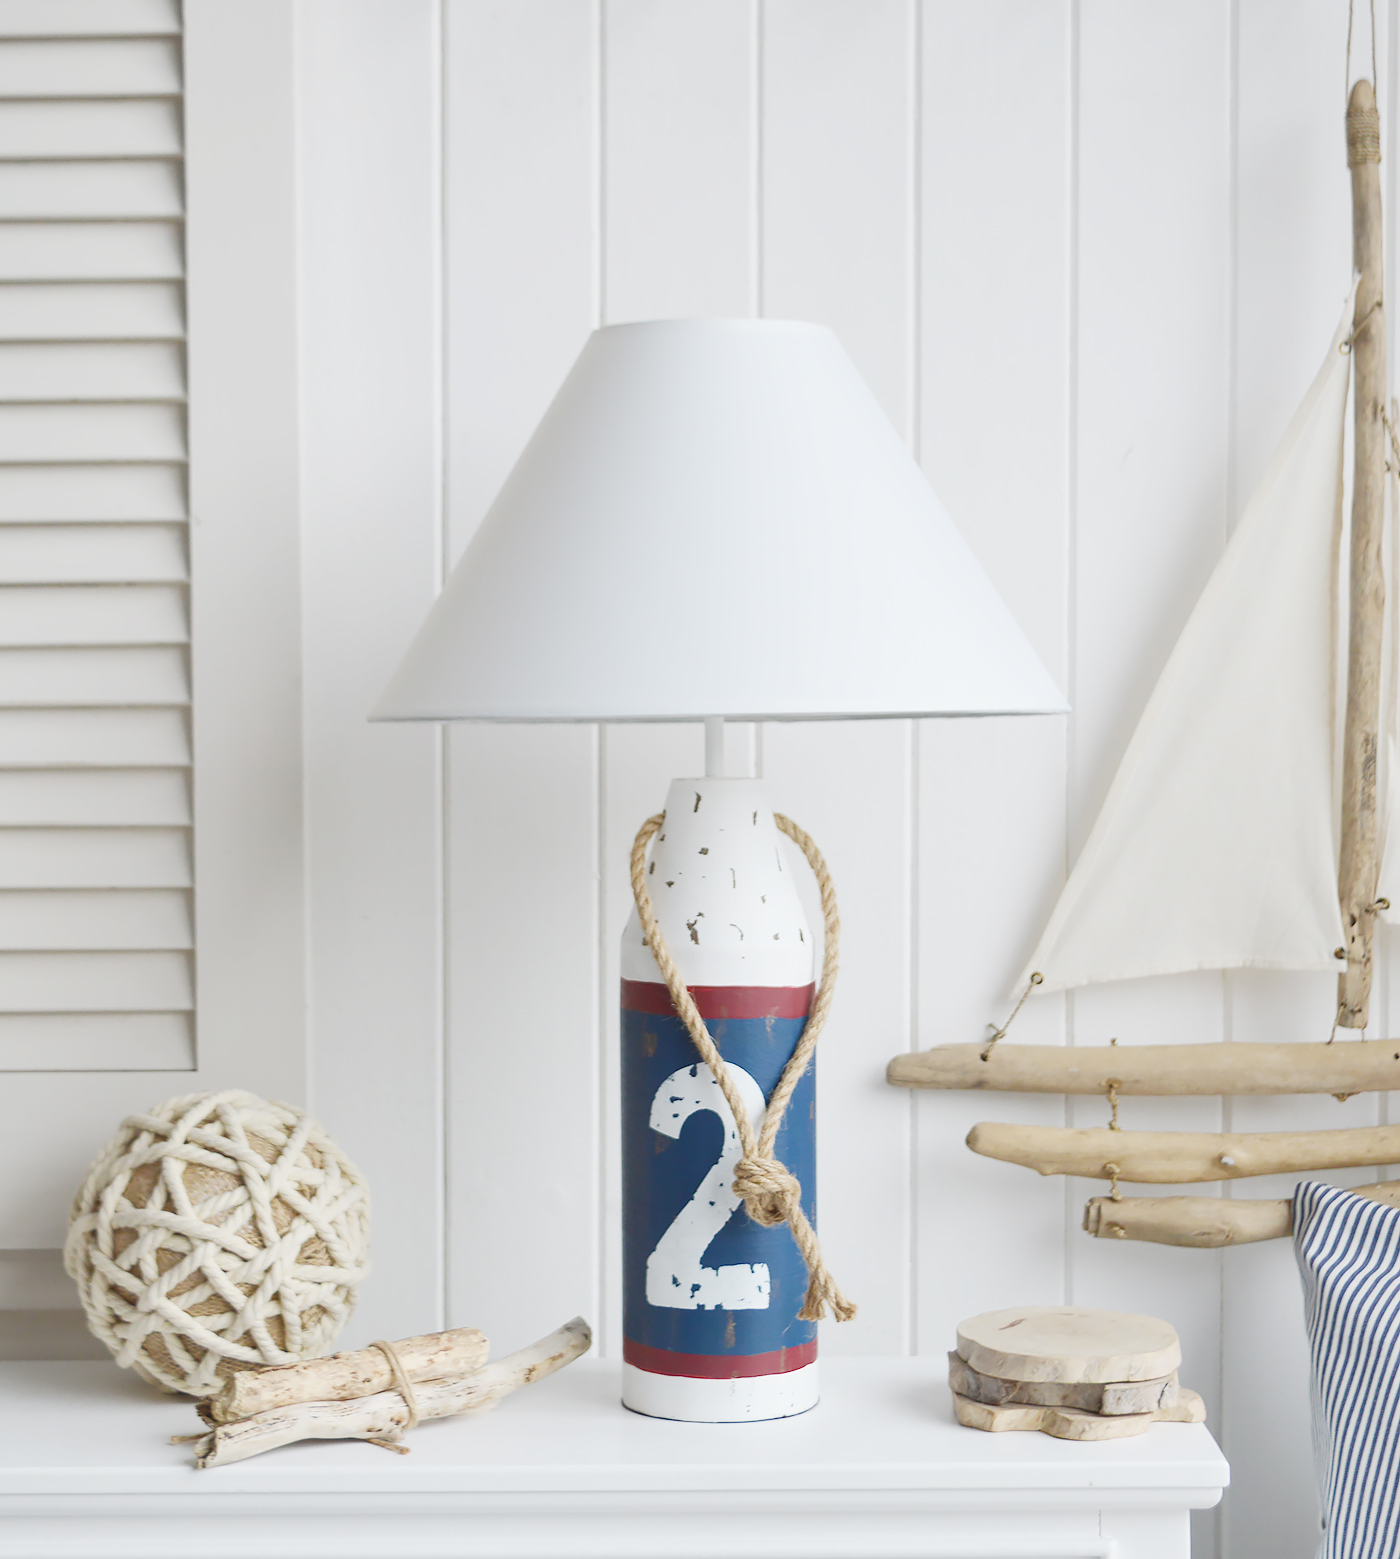 Float table lamp for New England lamps and lighting from The White Lighthouse Furniture. A lovely table lamp for bedside table or living room. New England furniture and interiors for coastal, country and city homes